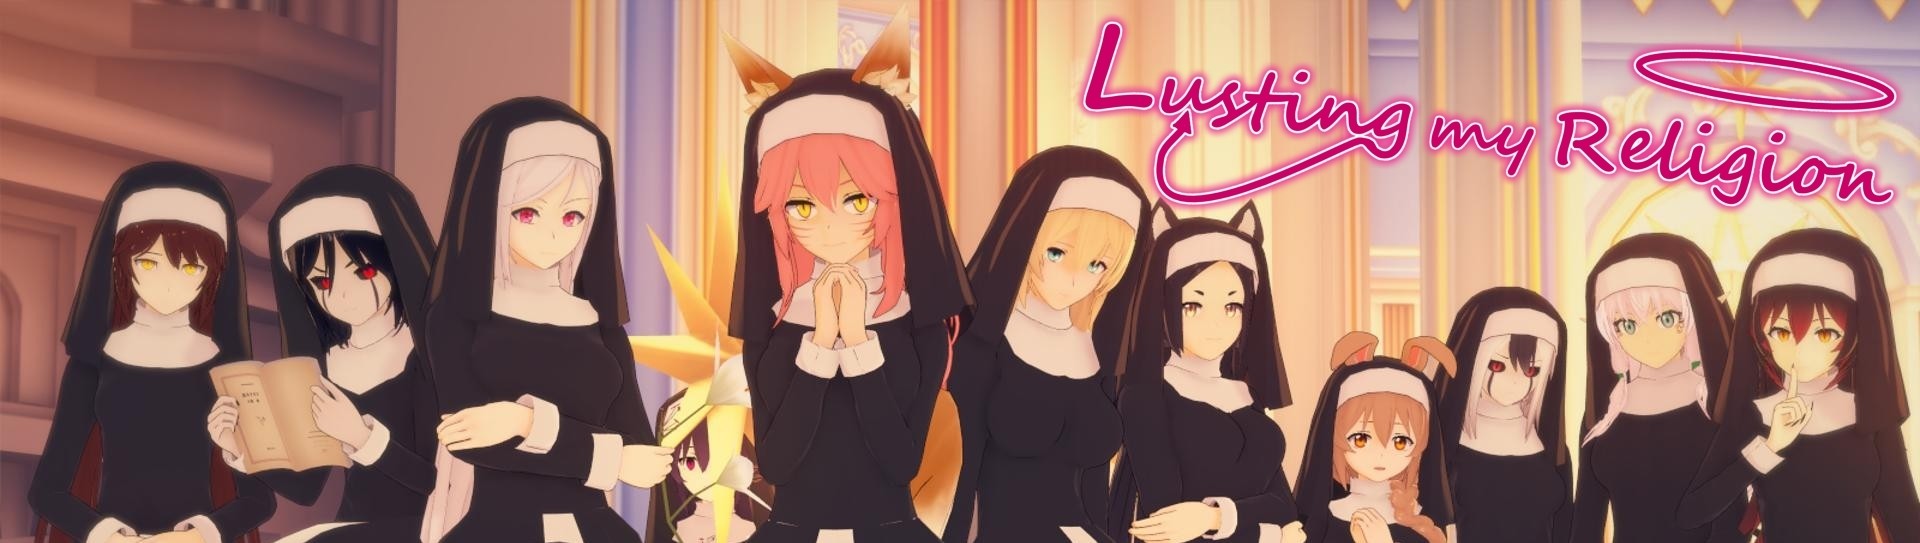 Lusting My Religion Apk Android Adult Game Download (9)